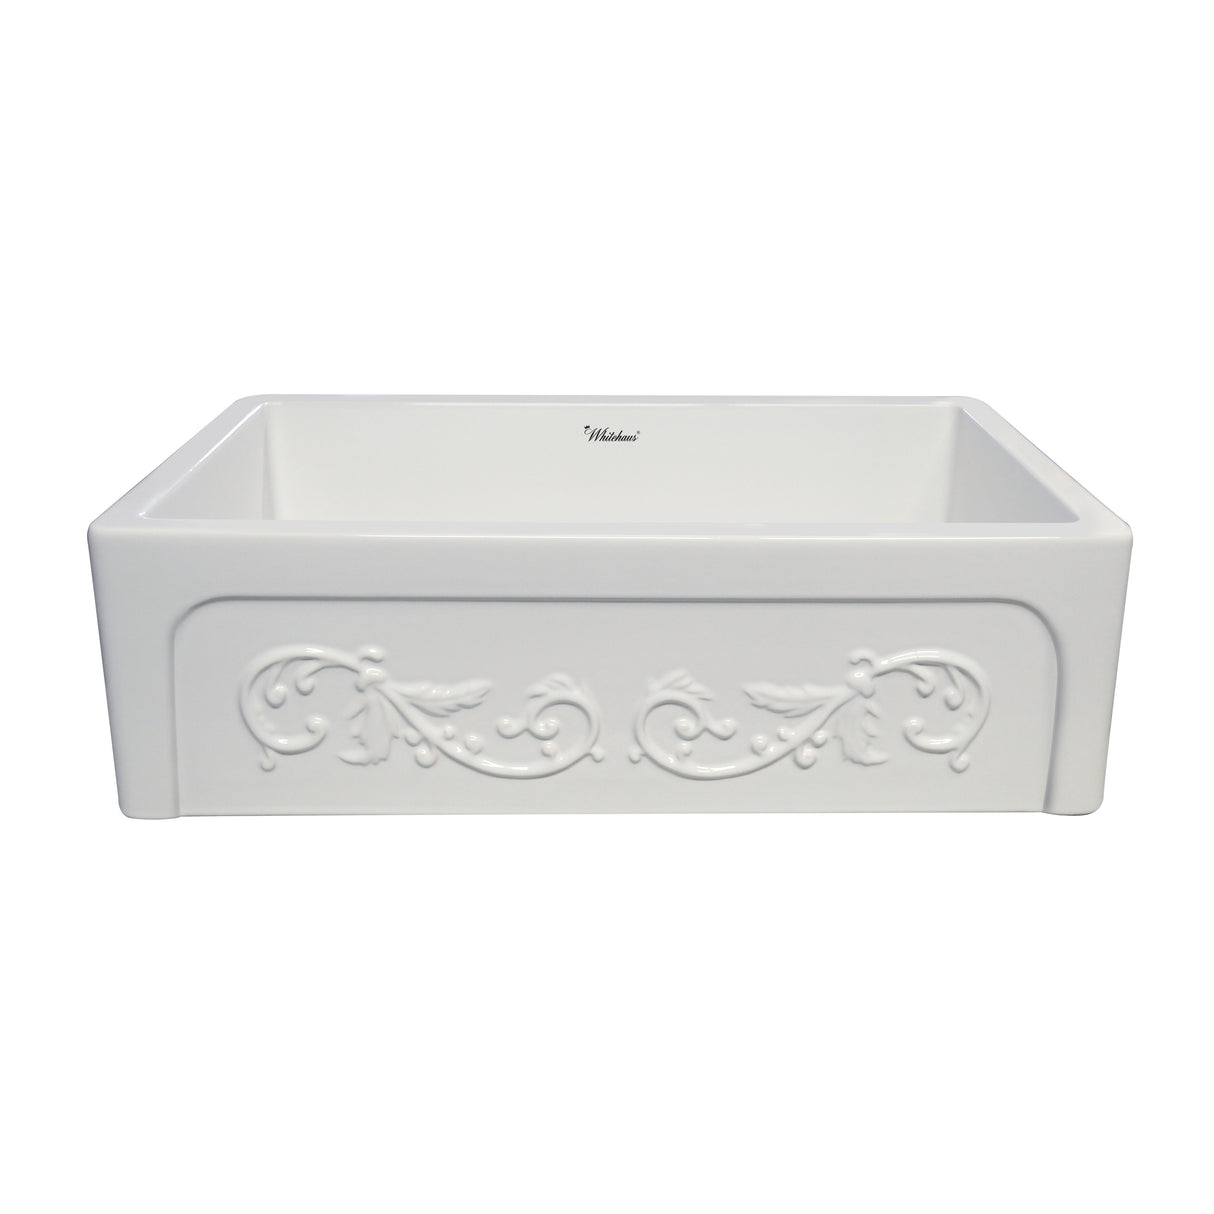 Glencove St. Ives 33" Front Apron Fireclay Sink with an Intricate Vine Design on one side and an Elegant Plain Beveled Front Apron on the Opposite Side